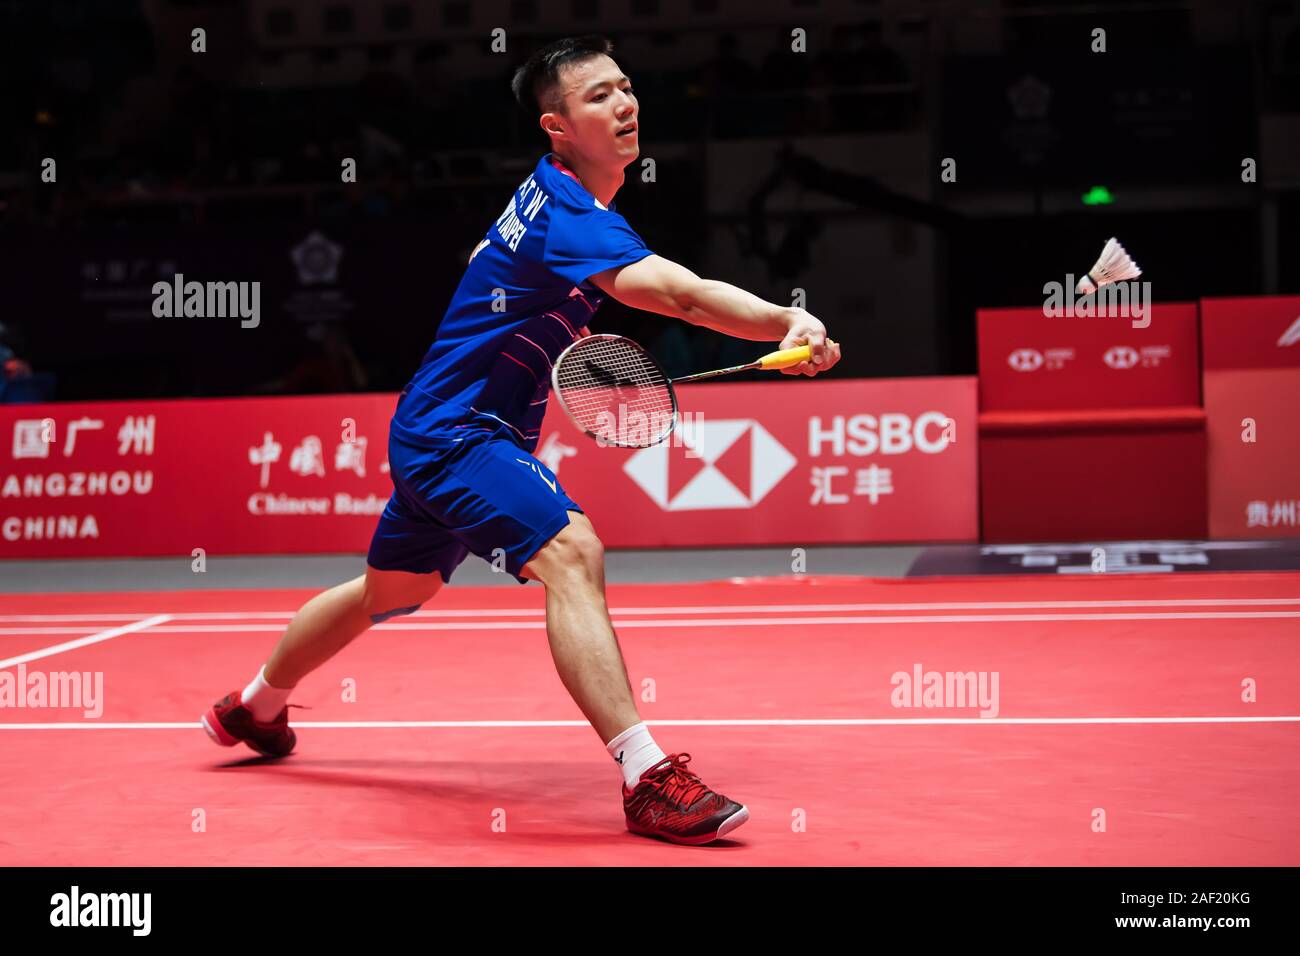 Wang Tzu-wei of China Taiwan competes against Kento Momota of Japan at group stage of men's singles of HSBC BWF World Tour Finals, Guangzhou city, south China's Guangdong province, 11 December 2019. Kento Momota of Japan defeated Wang Tzu-wei of China Taiwan with 2-0. Stock Photo